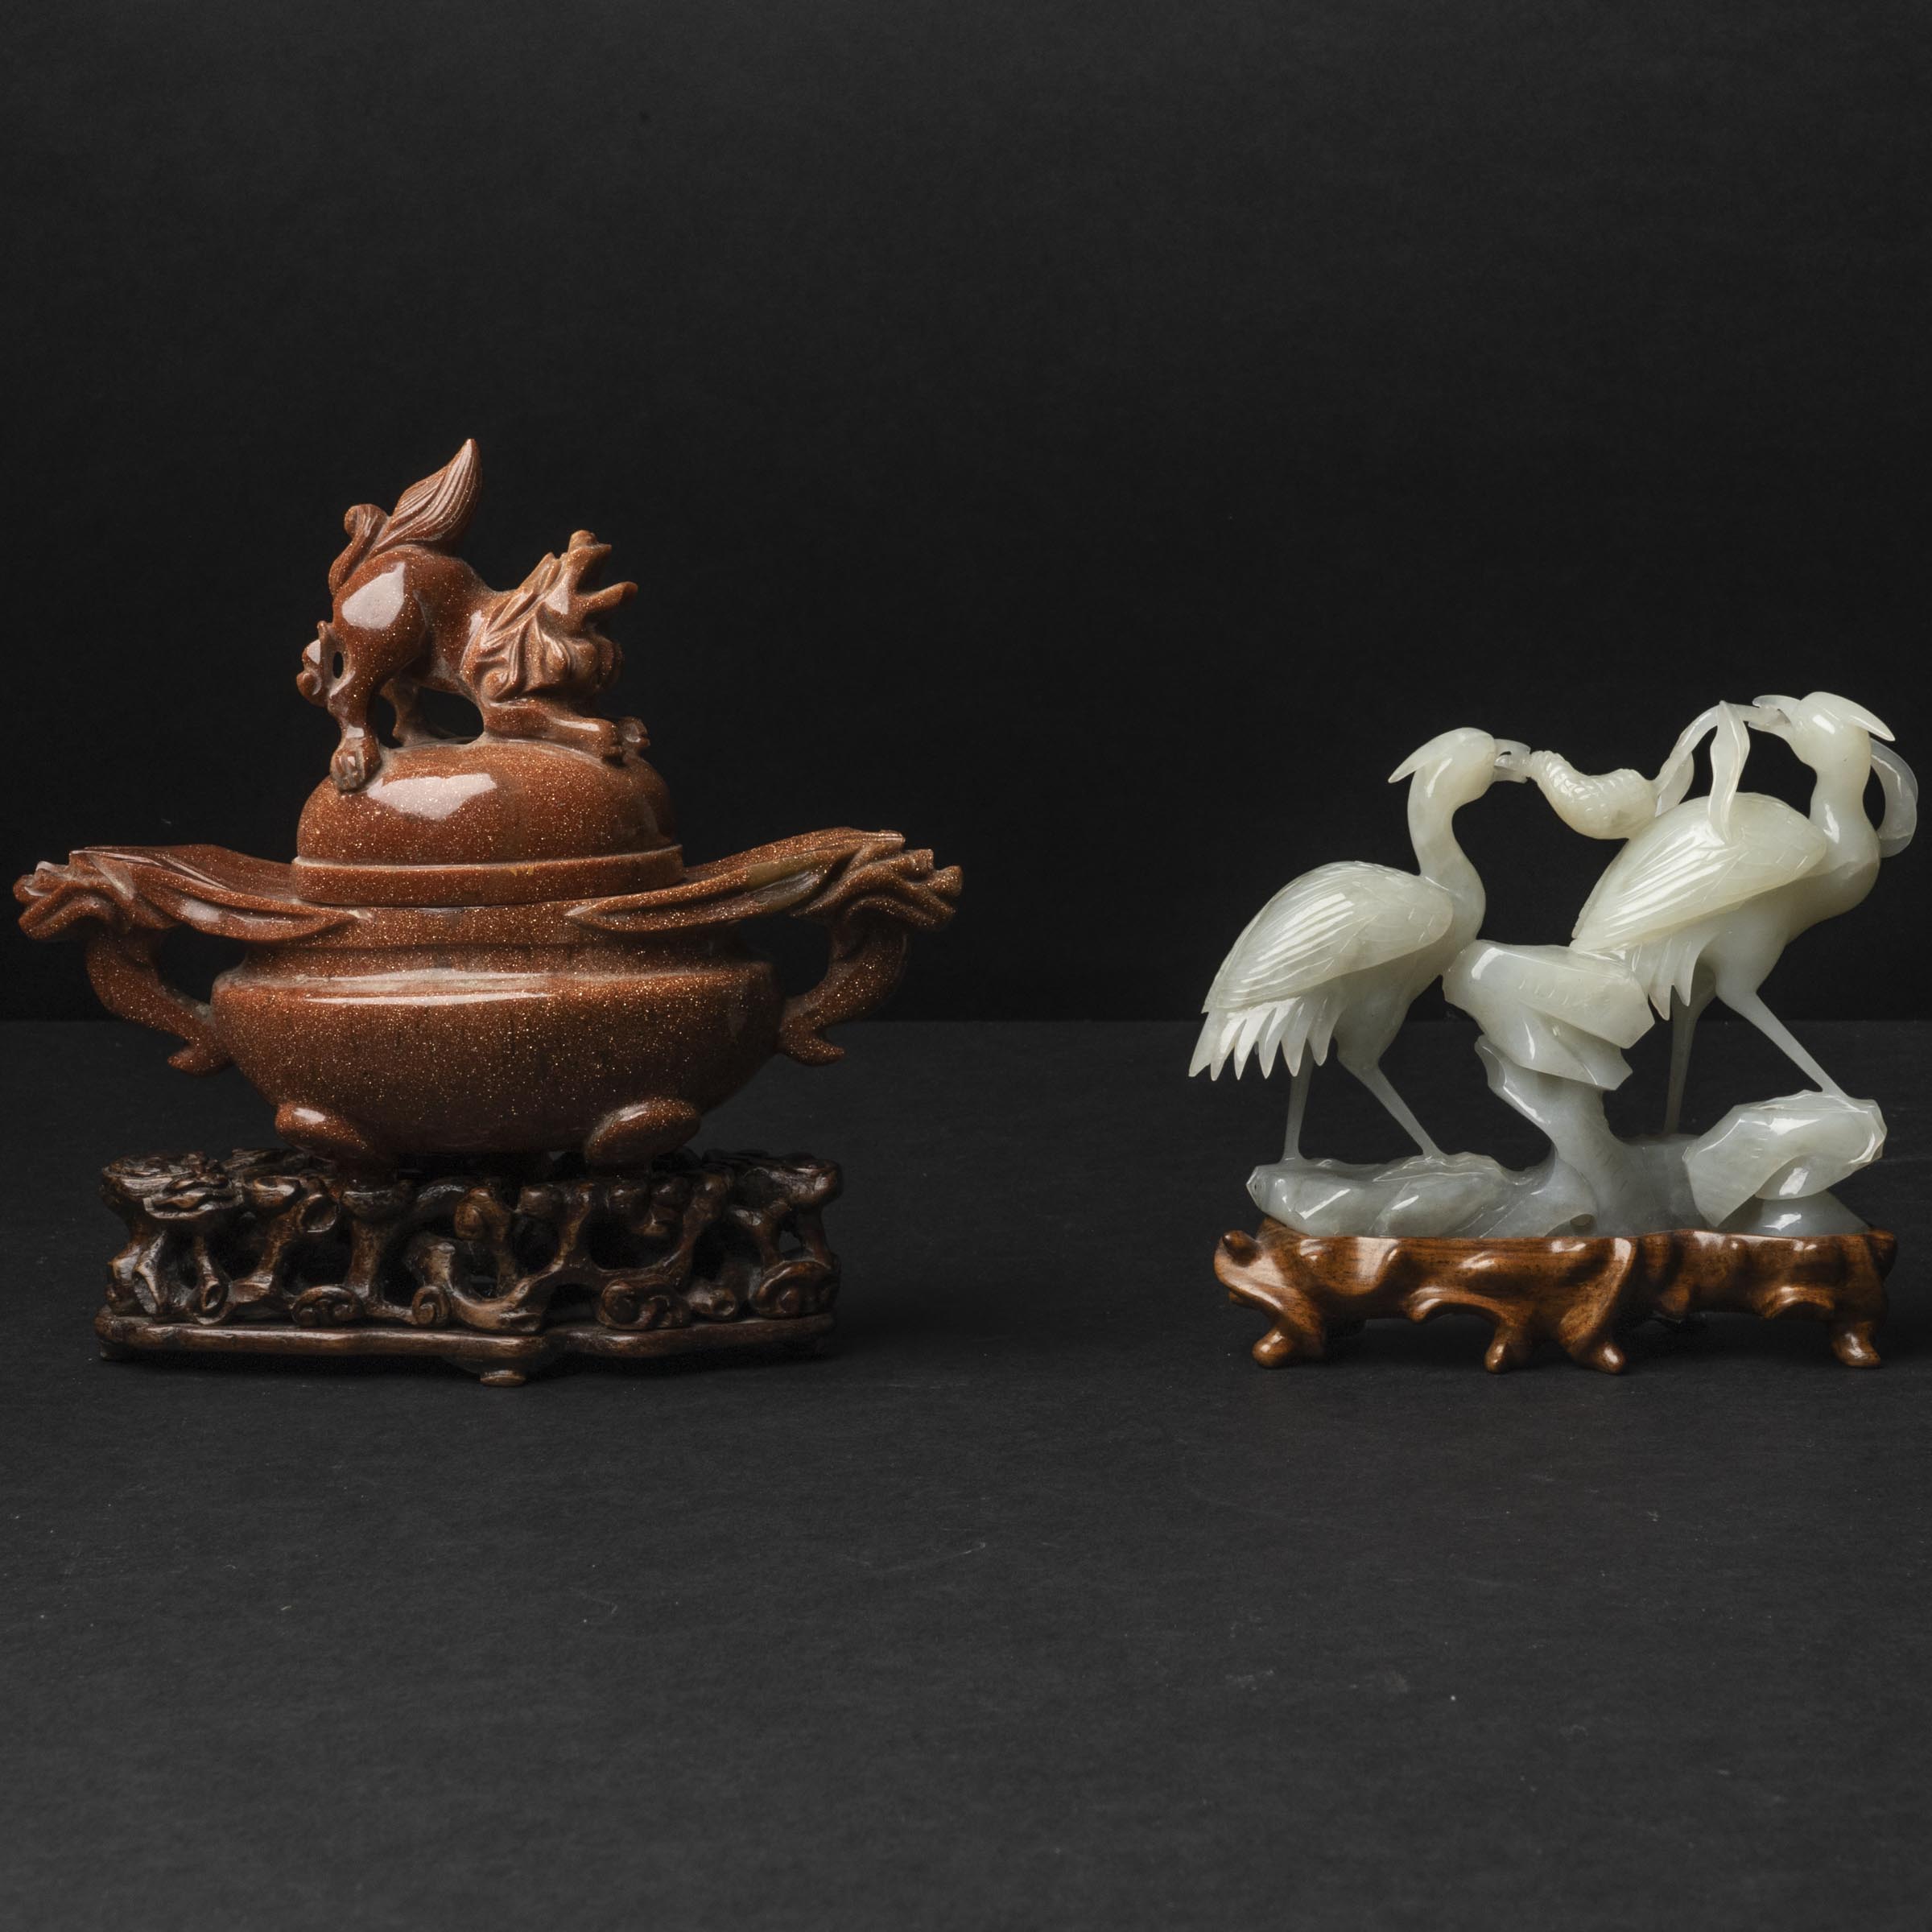 A White Jade 'Crane Holding Lingzhi' Group, Together With an Imitation-Goldstone Glass Censer, Early to Mid 20th Century